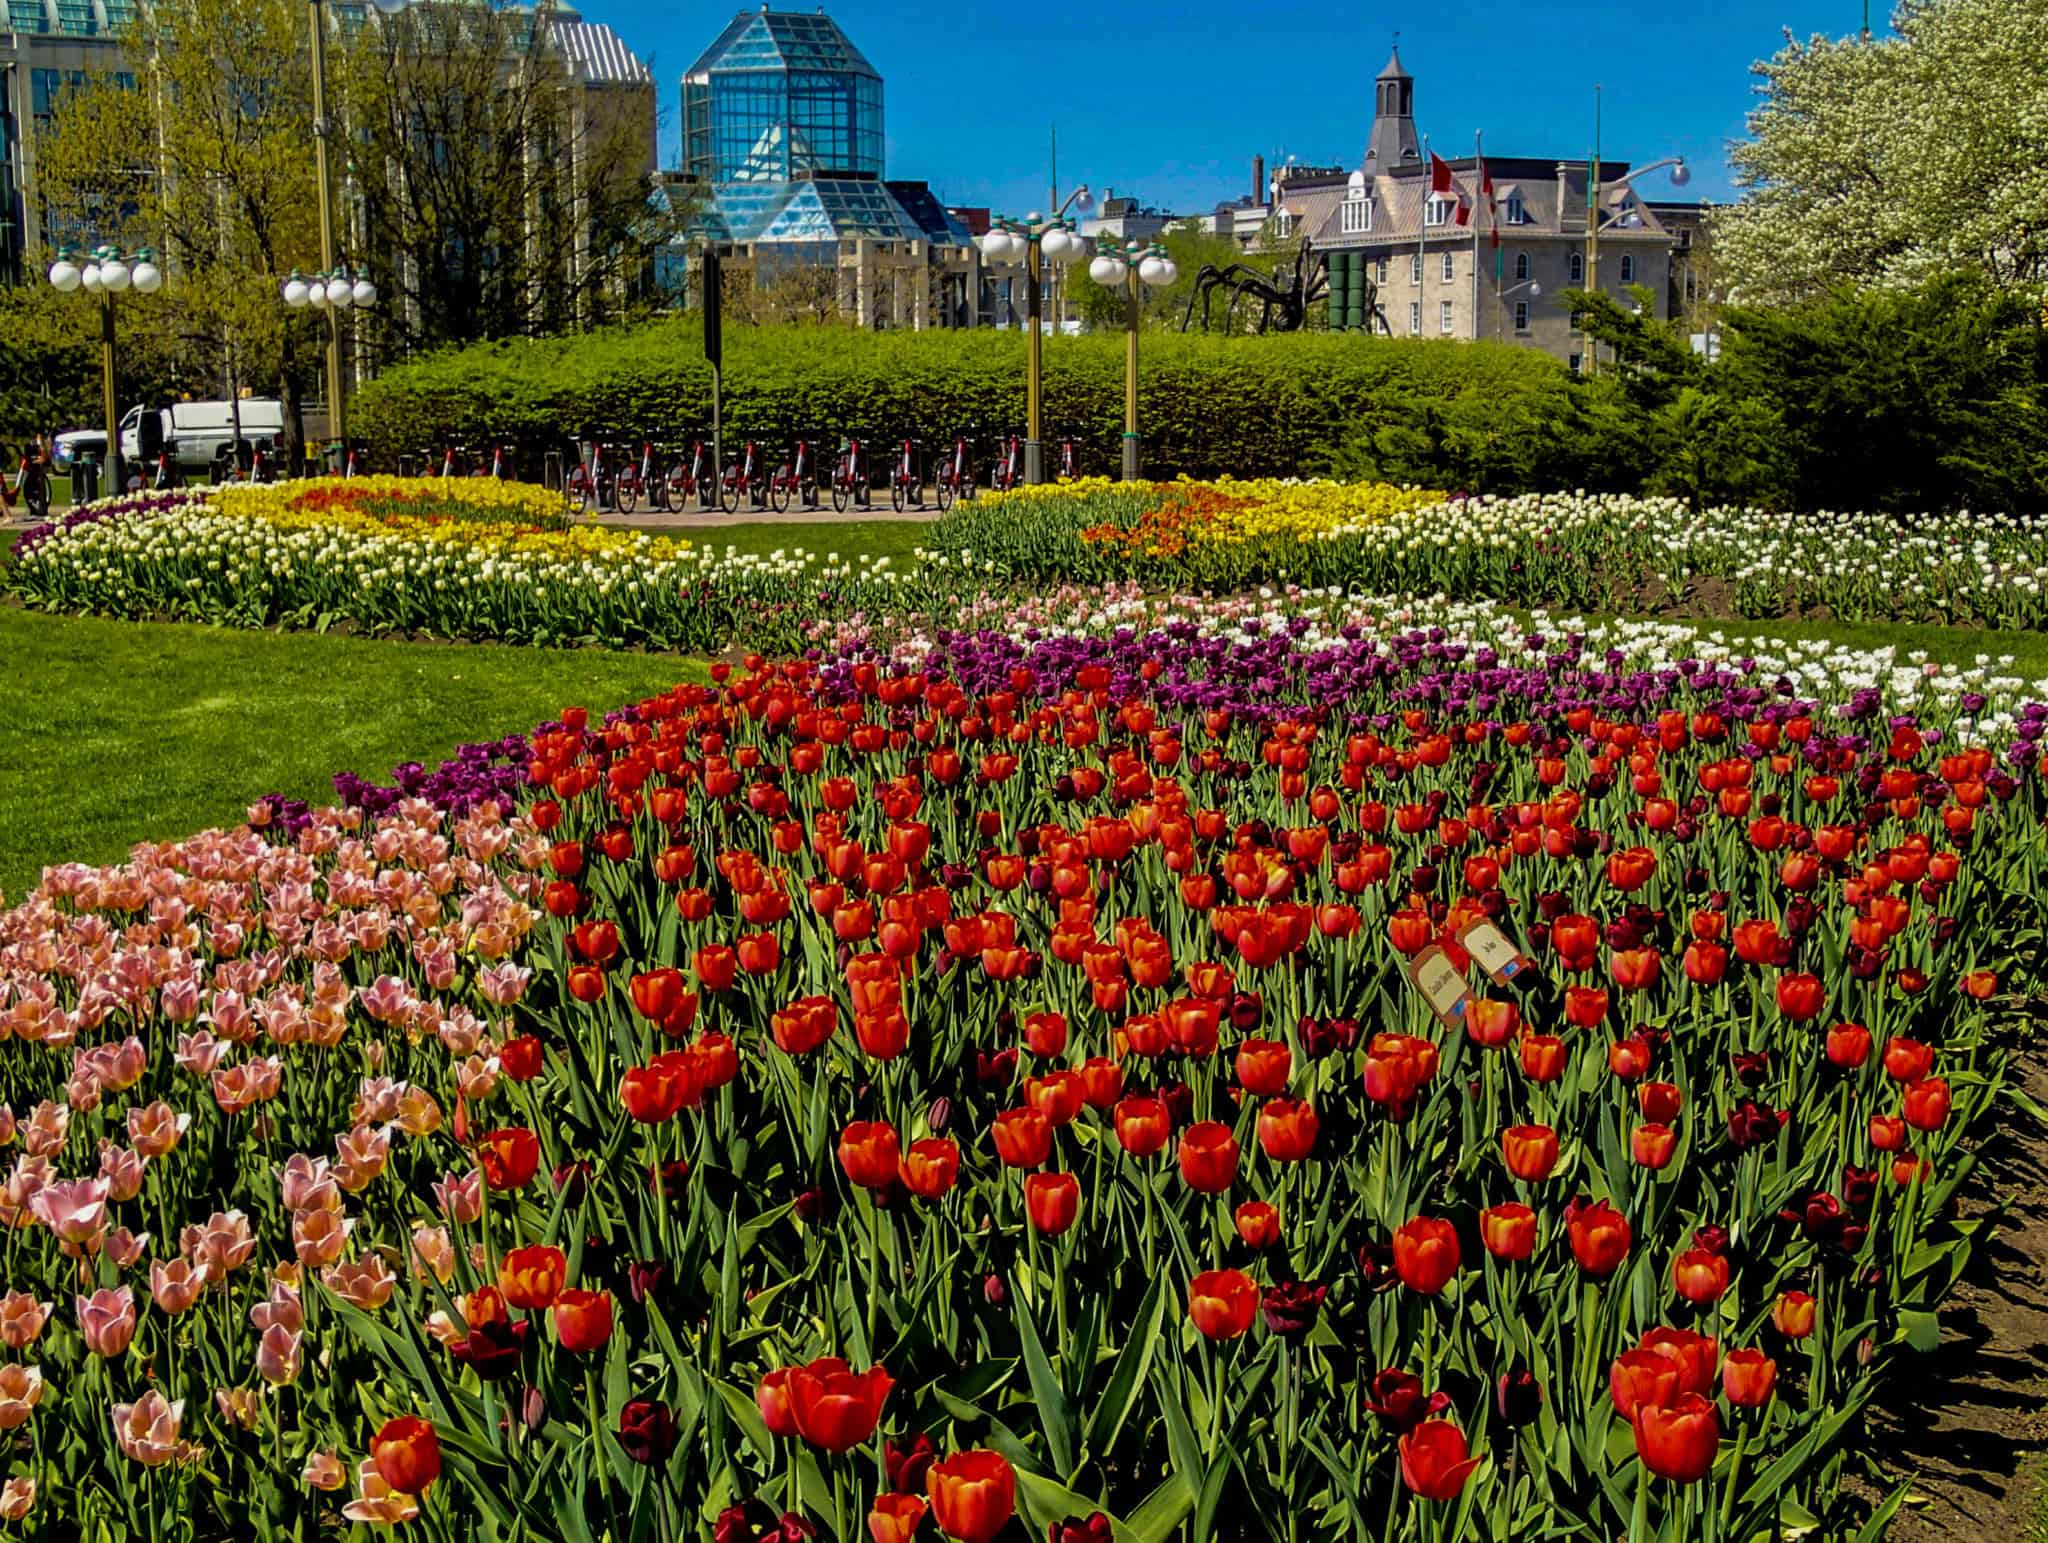 Visiting the Ottawa Tulip Festival is one of the things to do in Ottawa